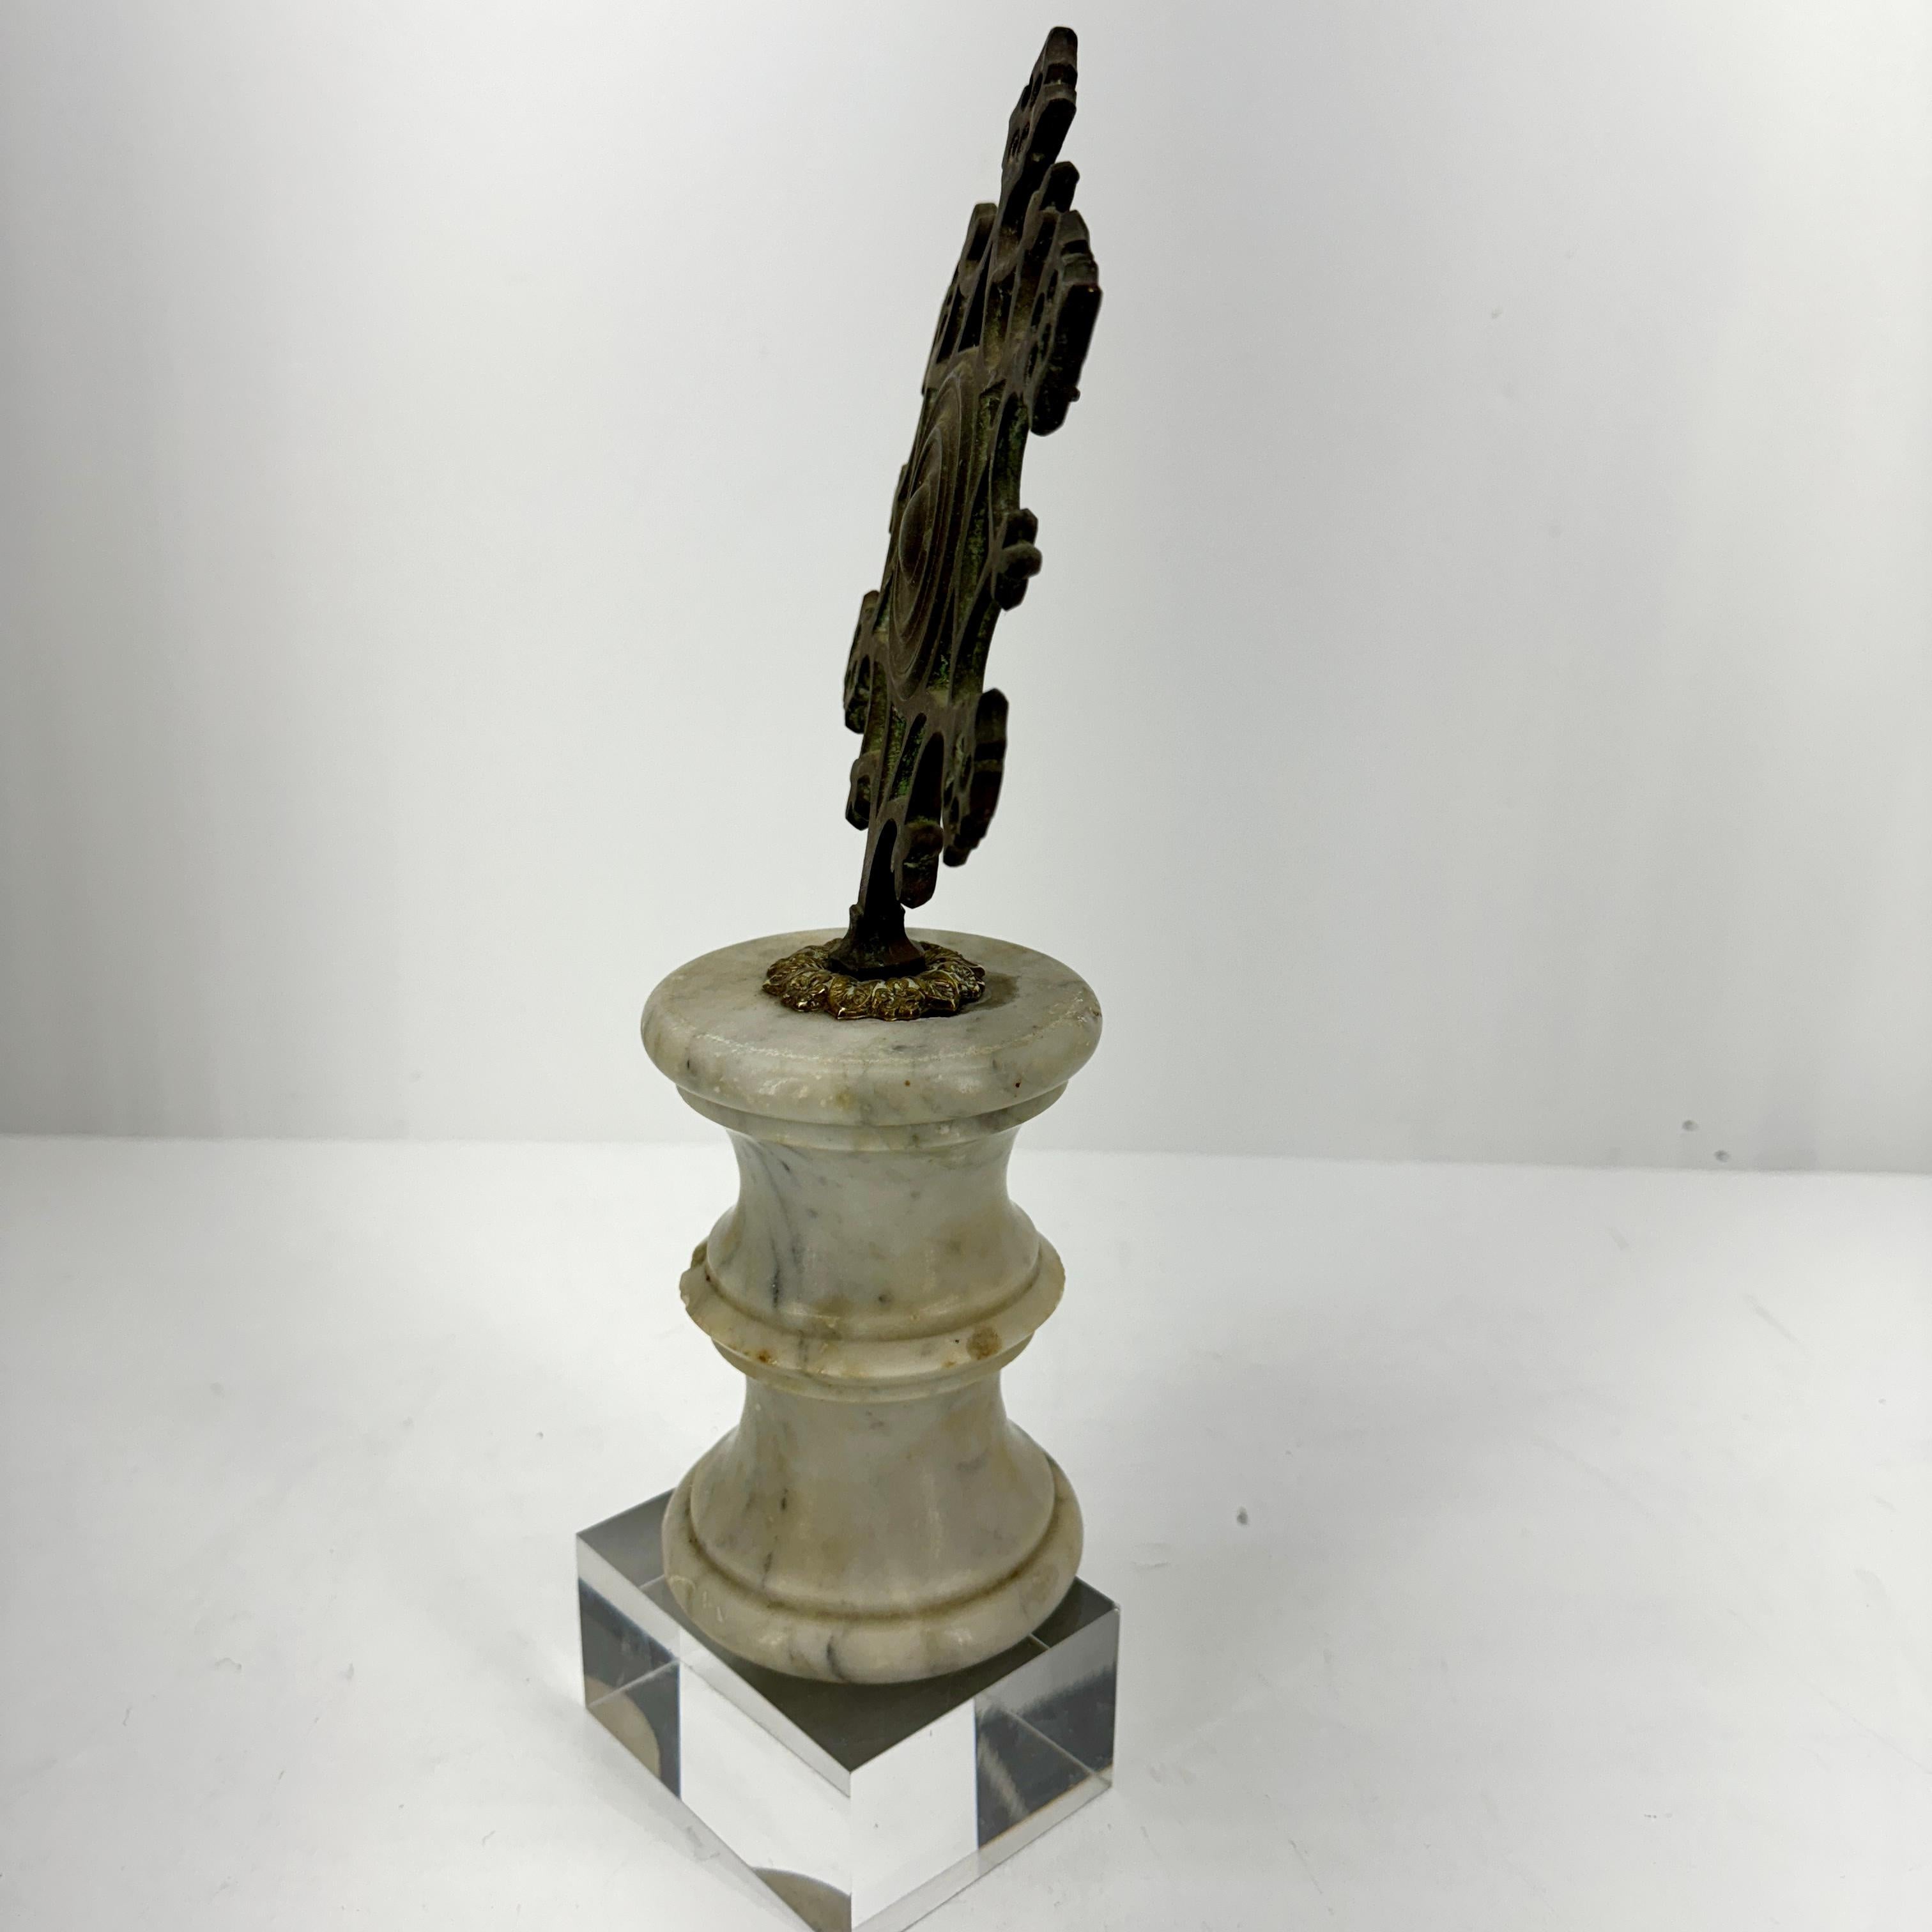 Hand-Crafted European Religious Bronze Sculpture Fragment on 19th Century Marble Pedestal For Sale